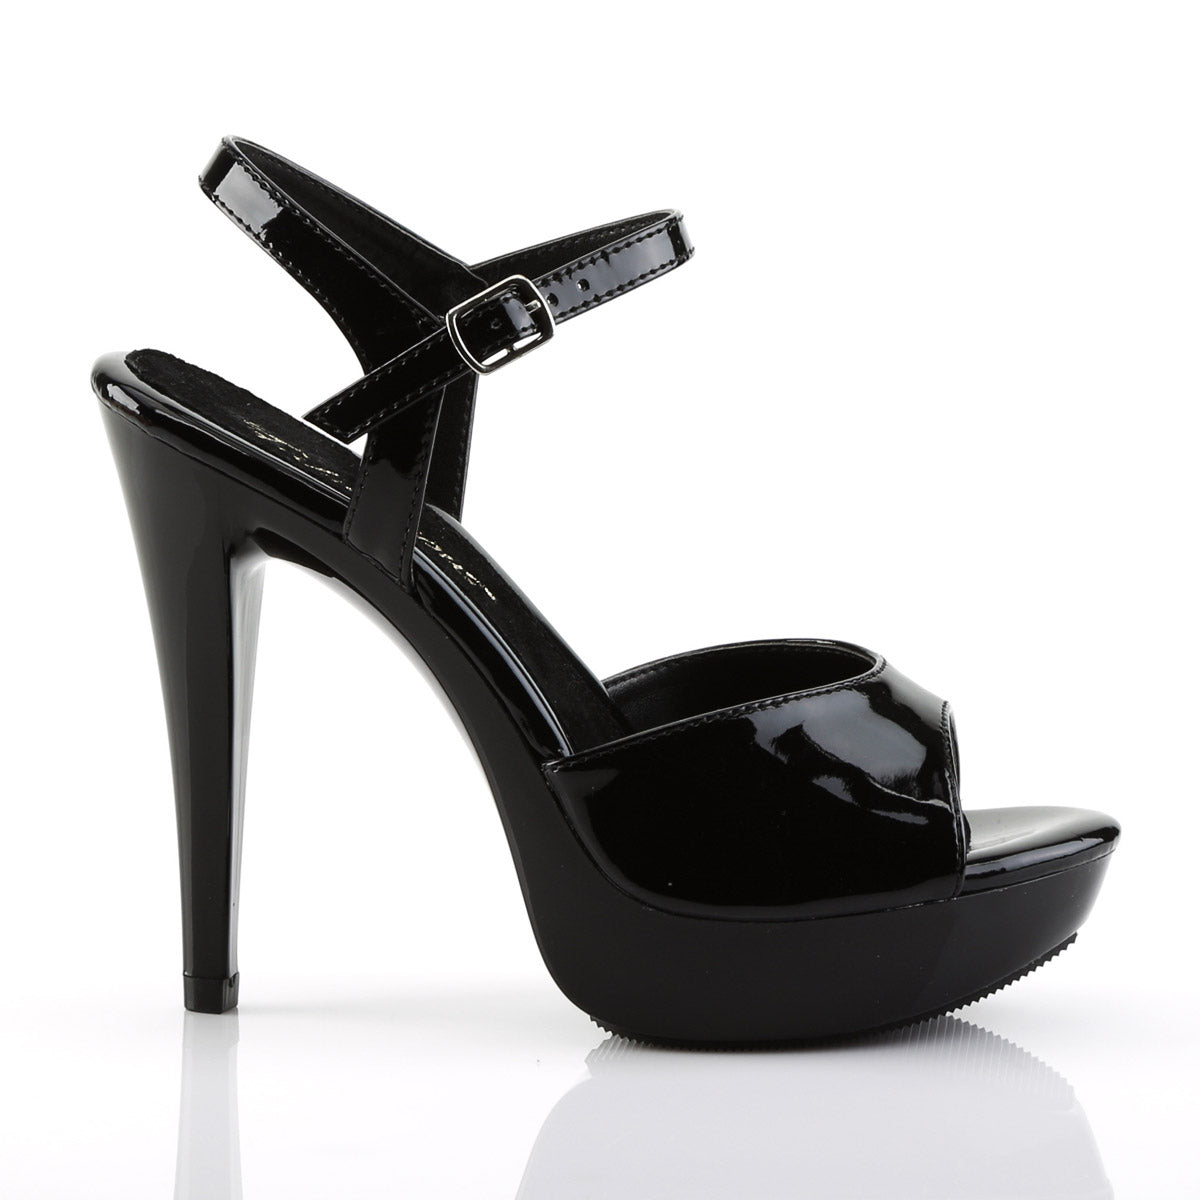 Sexy Platform Stiletto Peep Toe Ankle Strap Sandals High Heels Shoes Pleaser Fabulicious COCKTAIL/509